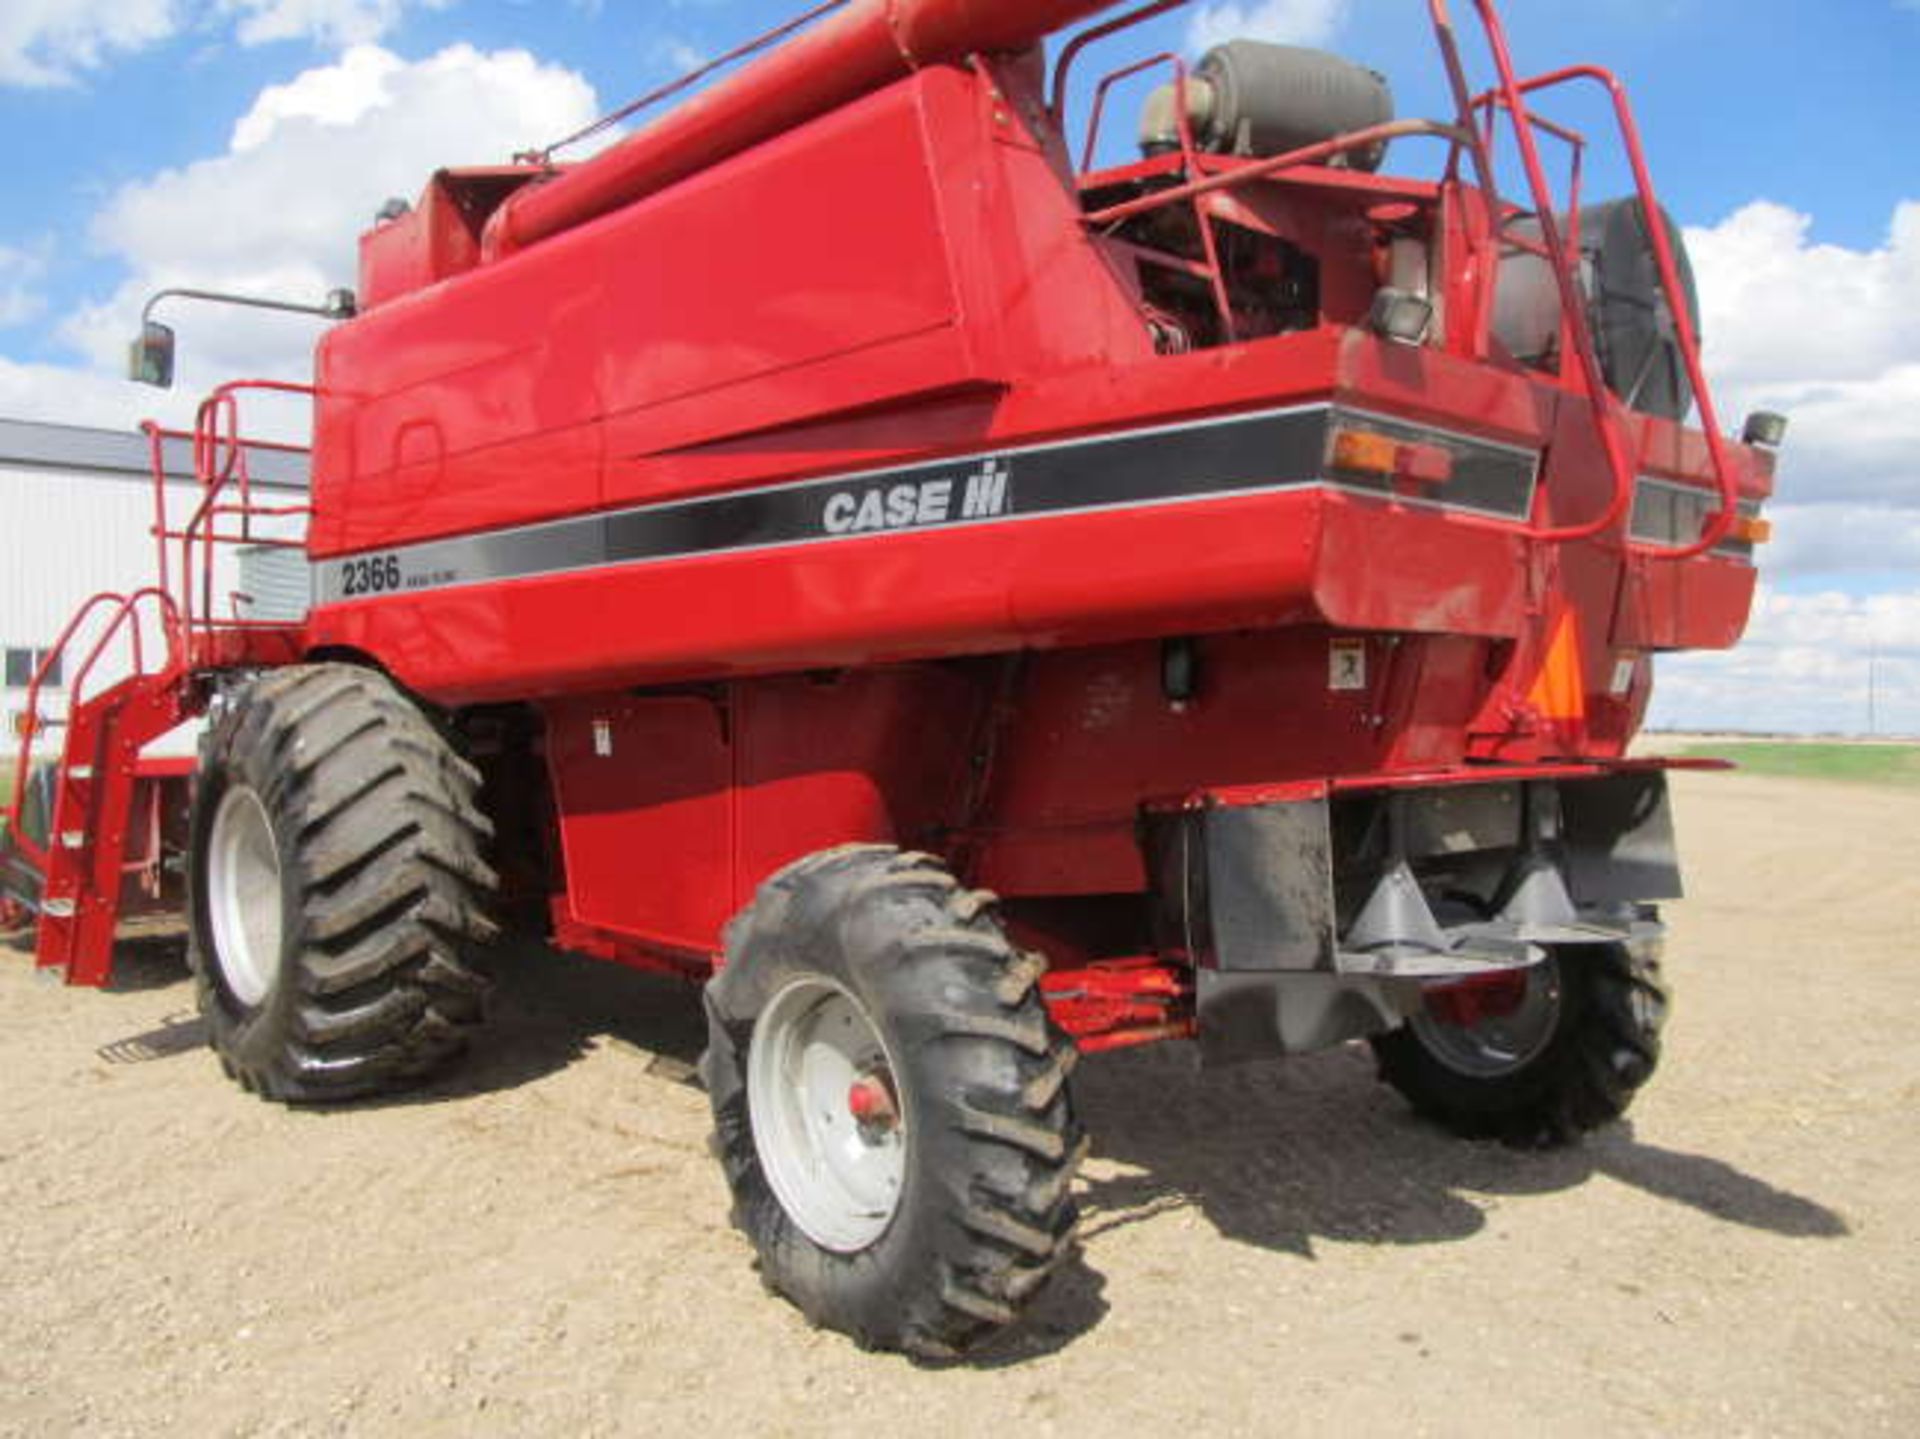 CASE IH 2366 AXIAL FLOW SP COMBINE; 987/1286 Rotor/Engine Hours, Case IH 1015 Pick-up Header, SN- - Image 4 of 5